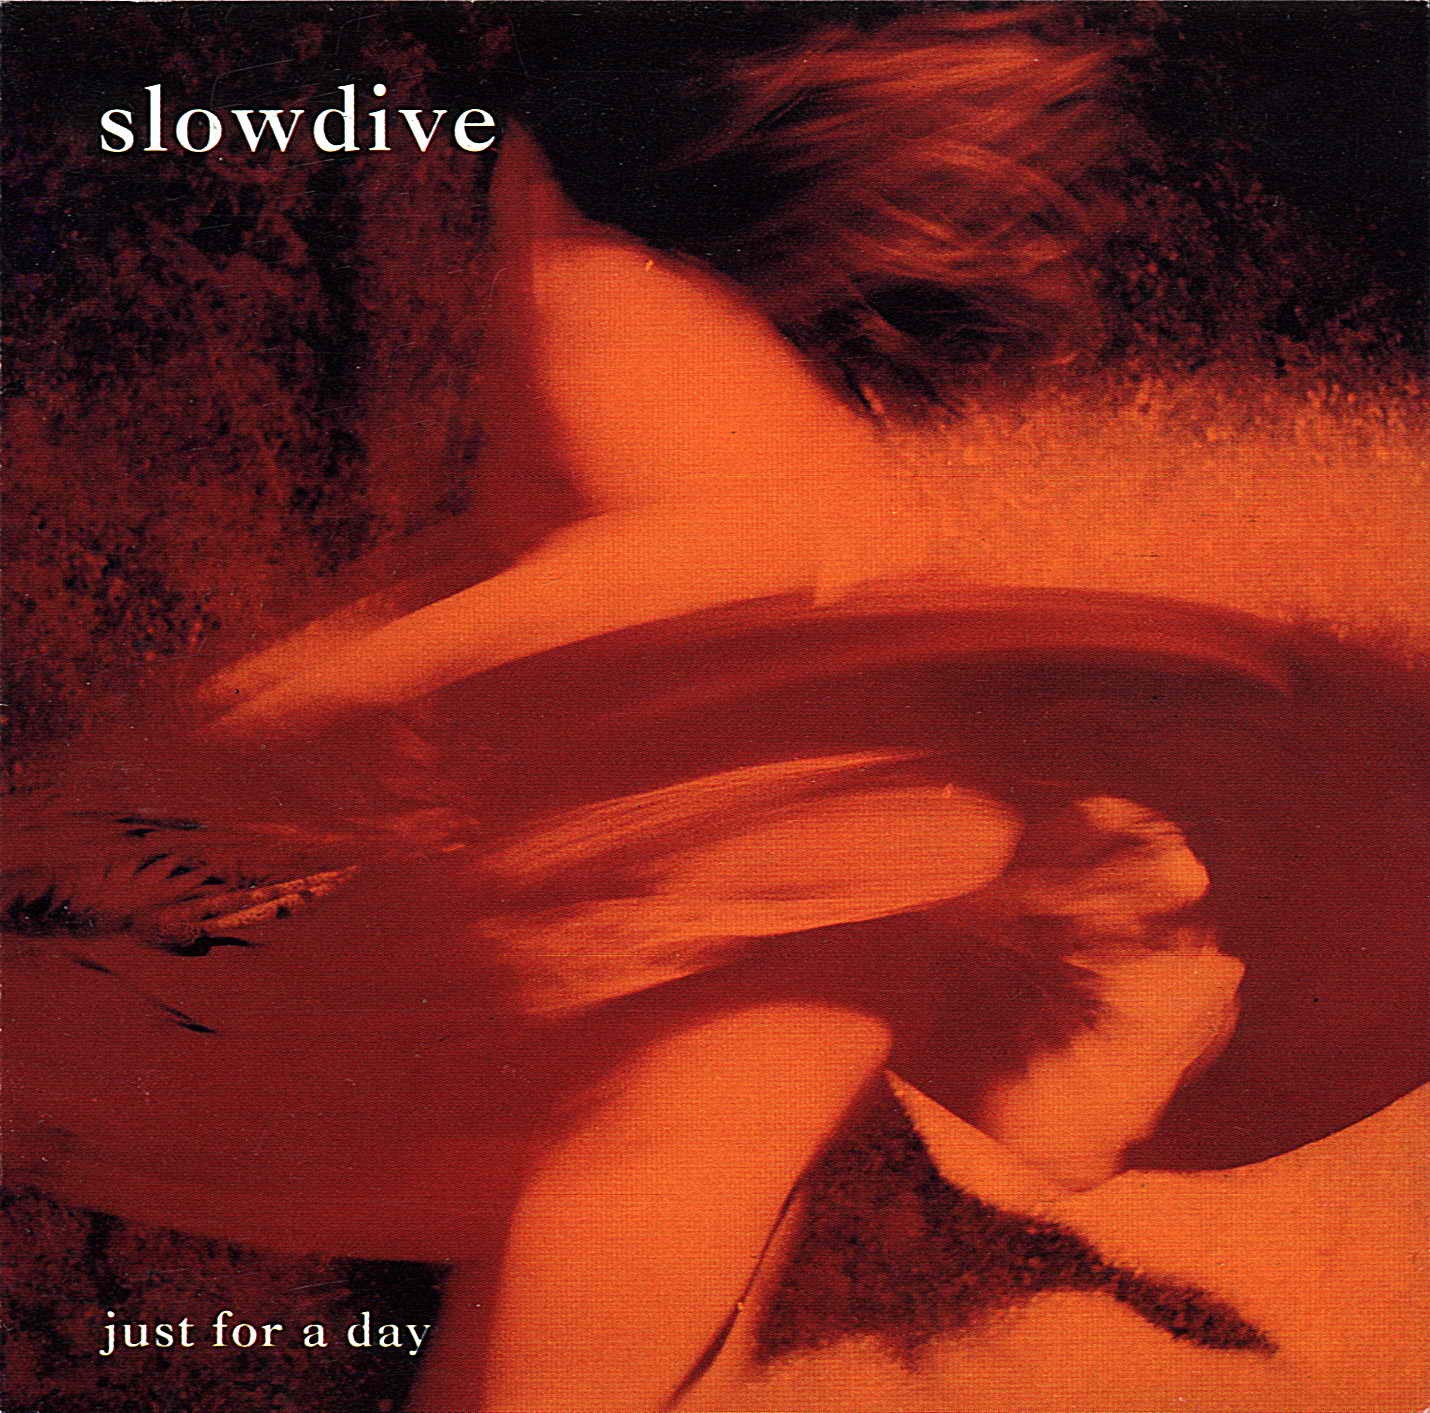 [[AllCDCovers]_slowdive_just_for_a_day_1991_retail_cd-front.jpg]